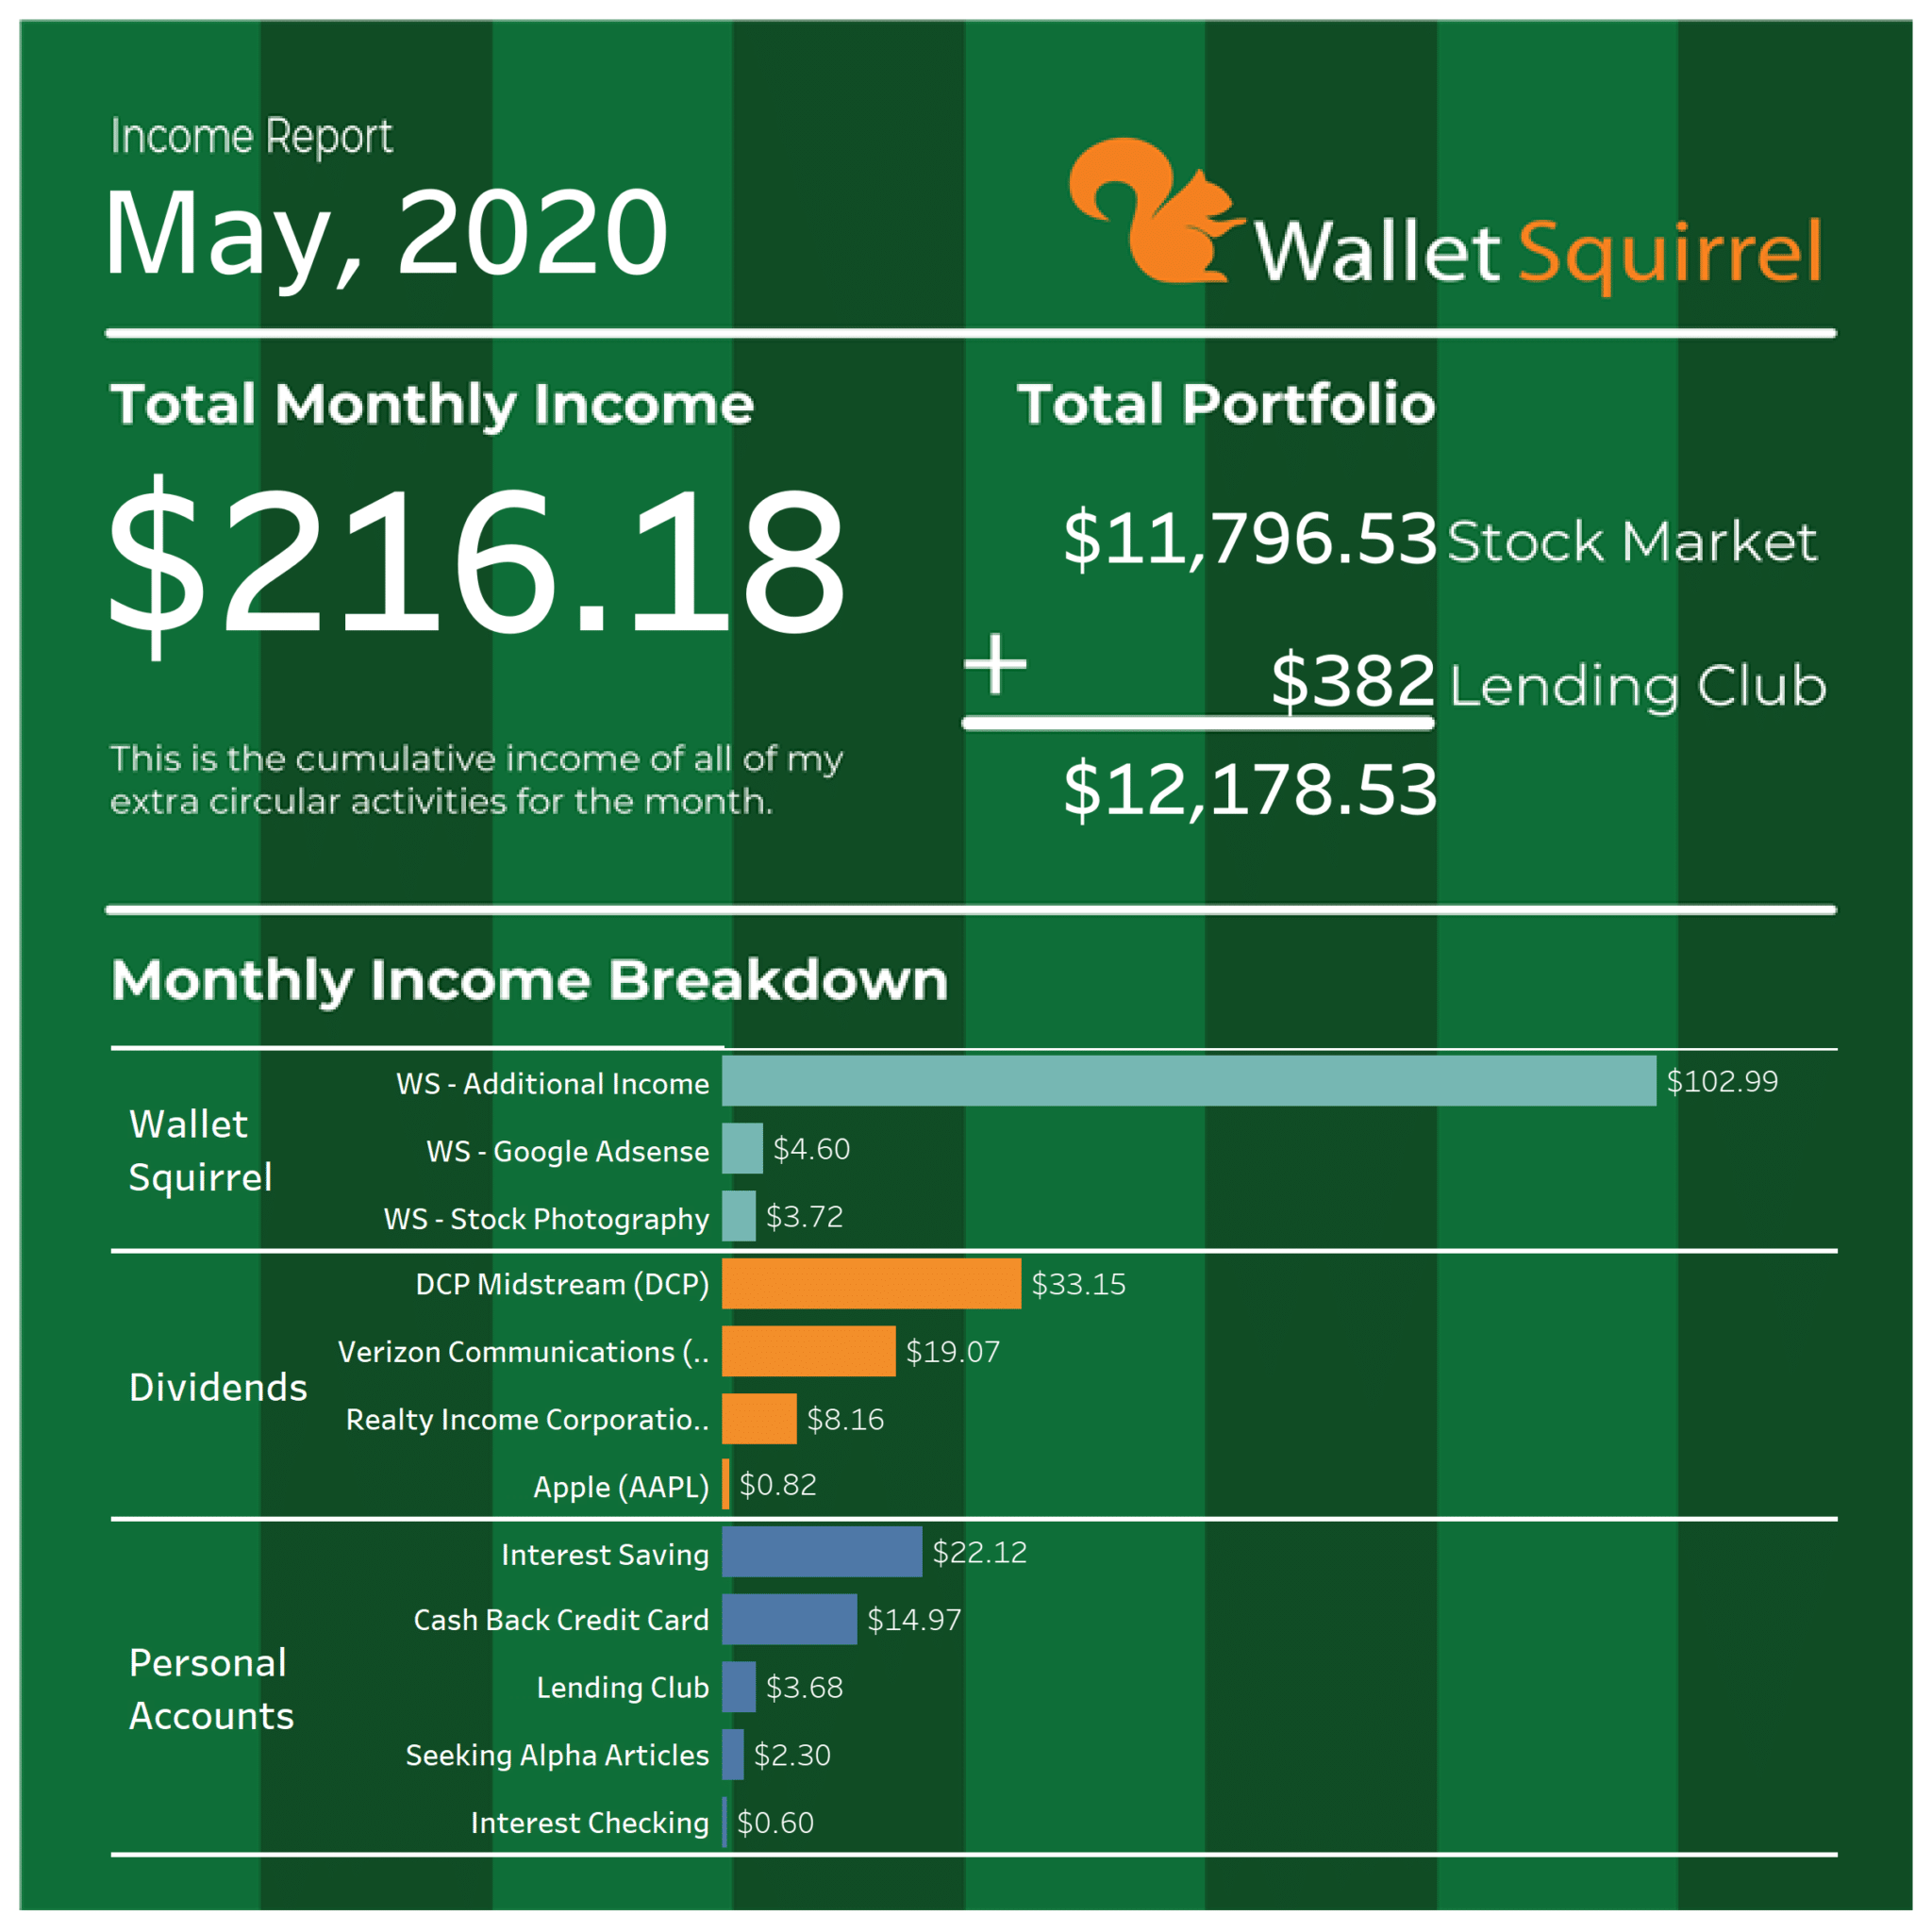 Wallet Squirrel's May 2020 Monthly Income Report.